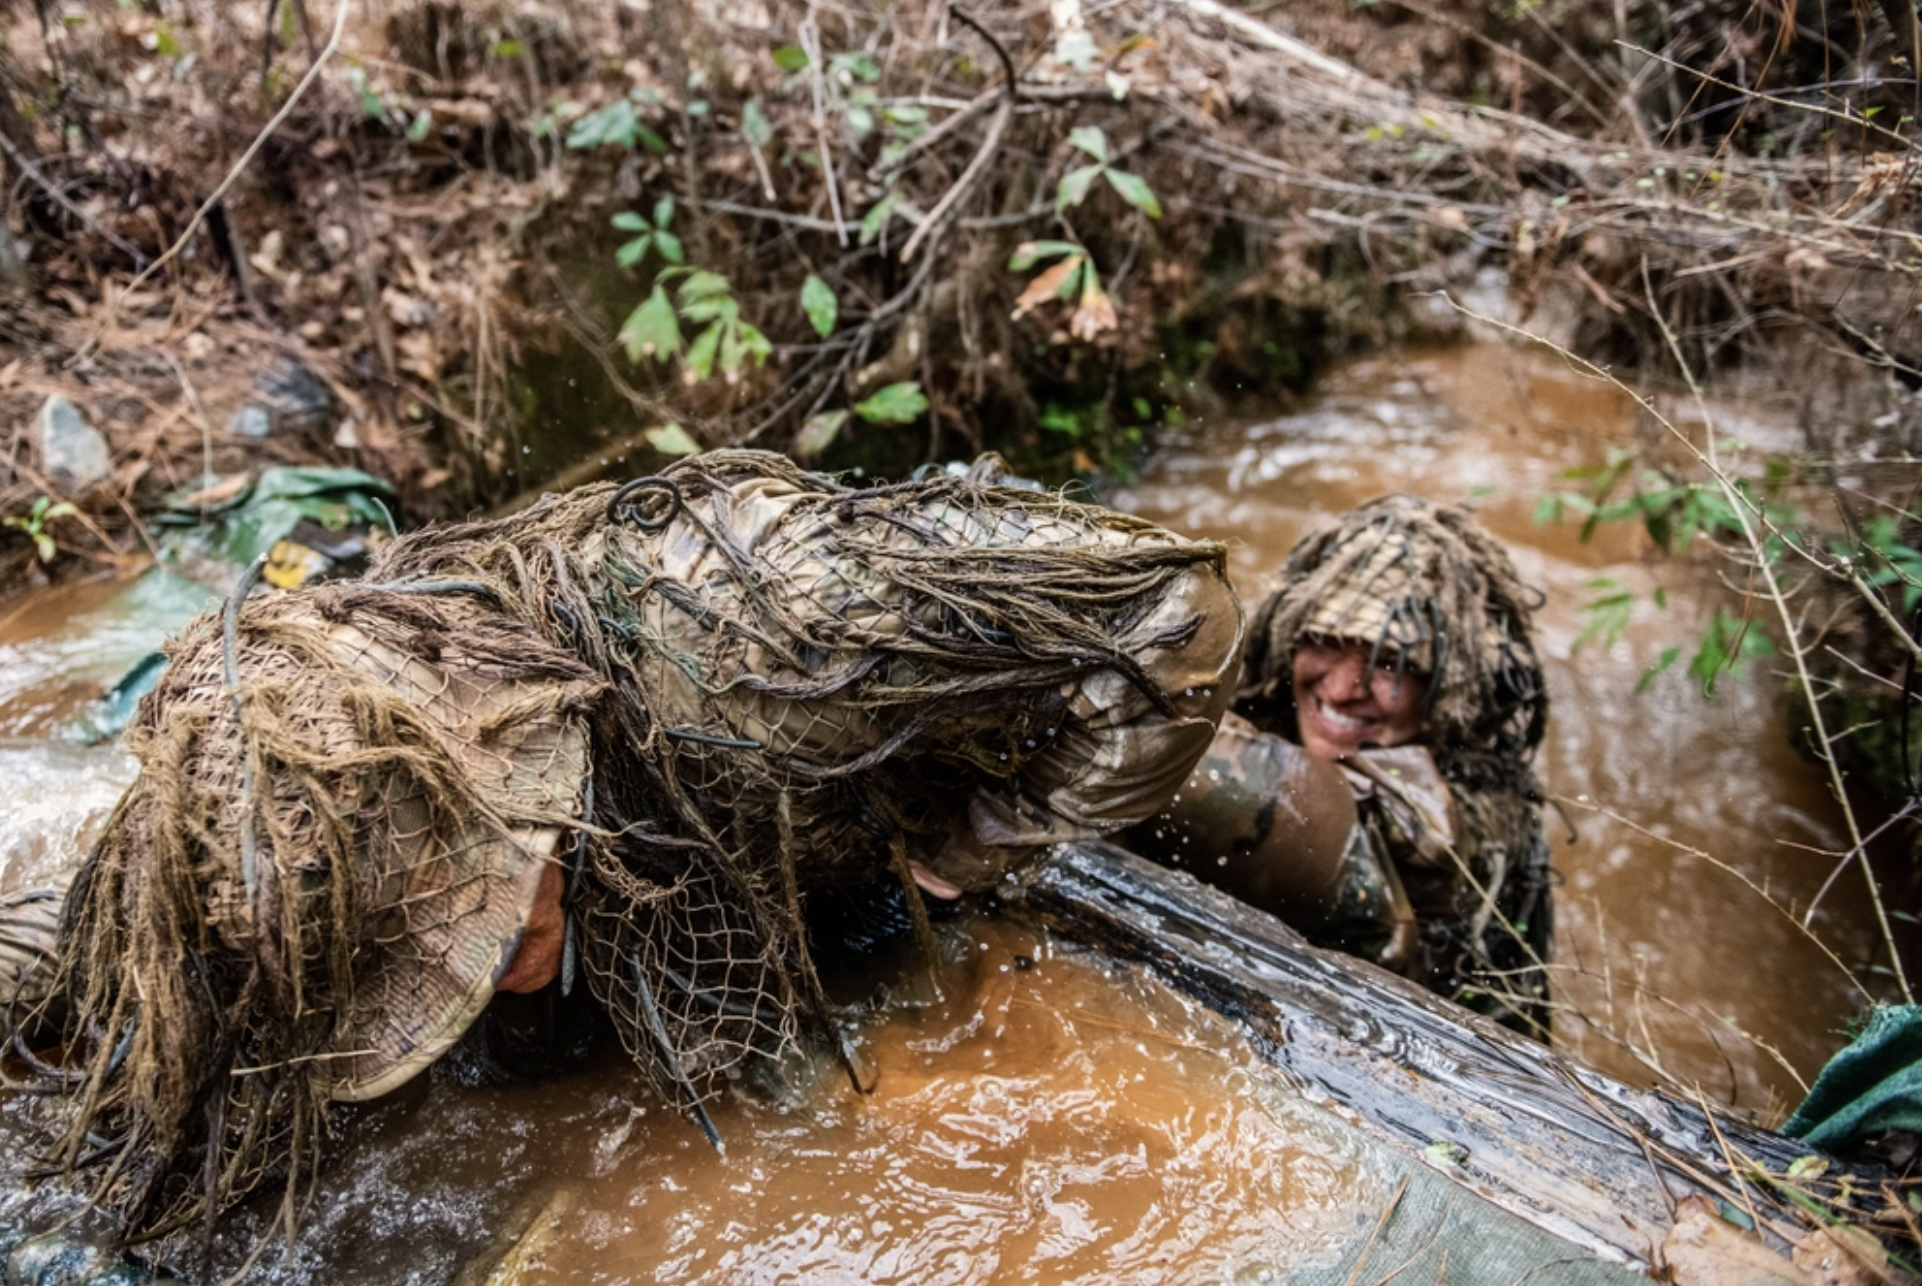 (Fort Benning, Ga) – In Week 3 of U.S. Army Sniper School, 35 students participate in the ghillie wash, which is designed to test the strength and durability of the suits as well as weather them. Sniper School students use sand, water and mud, all in an effort to perfect one of their most important tools: their camouflage. (U.S. Army photo by Patrick A. Albright, Maneuver Center of Excellence and Fort Benning Public Affairs)